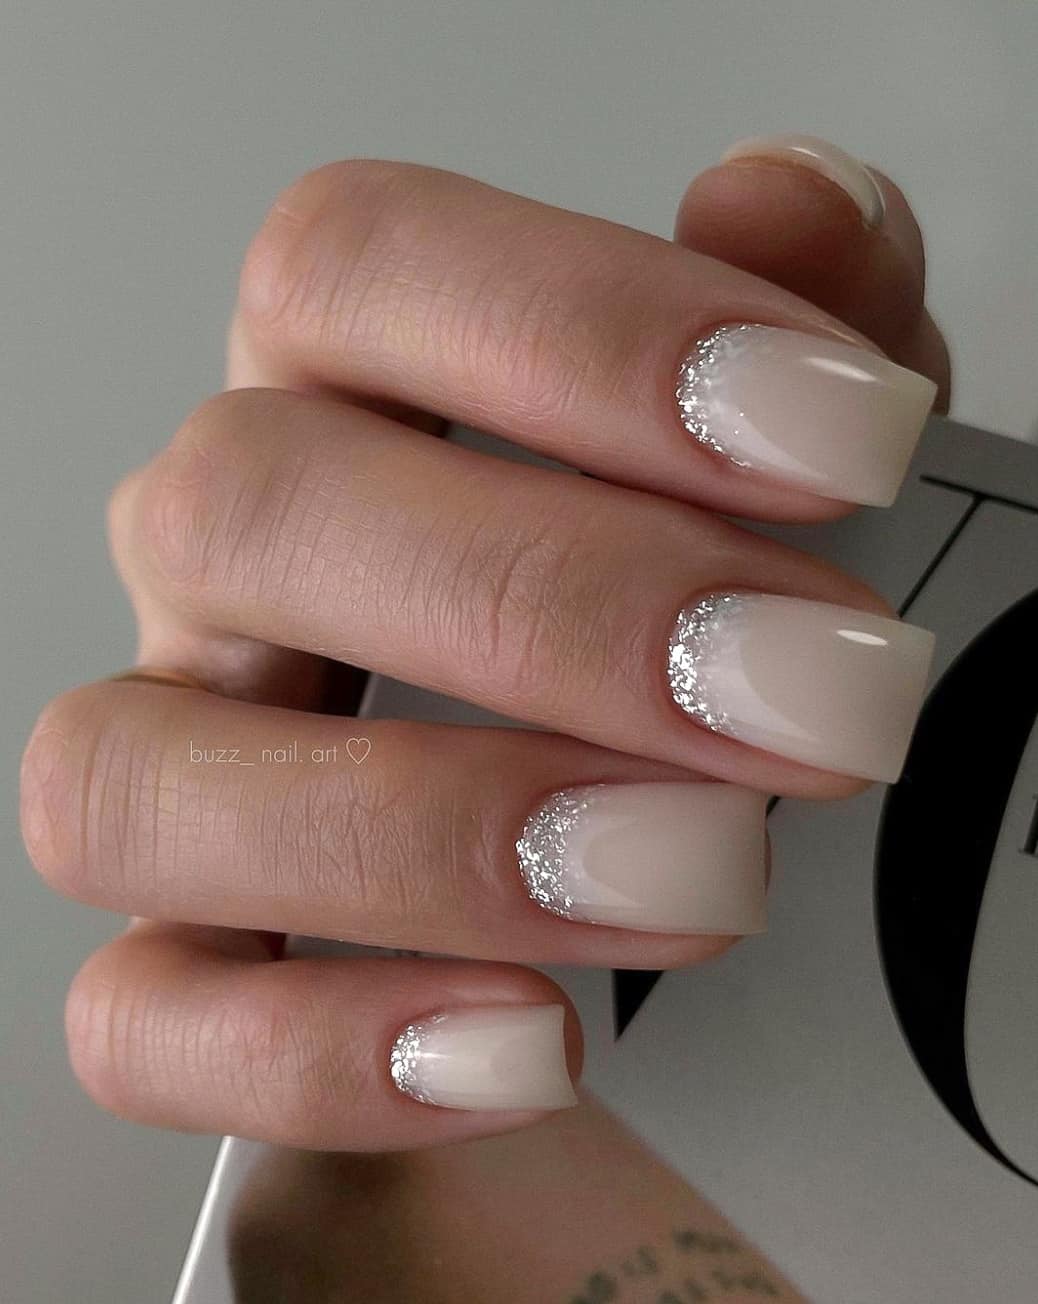 A hand with short square nails with a milky white base and silver glitter accents along the bottom